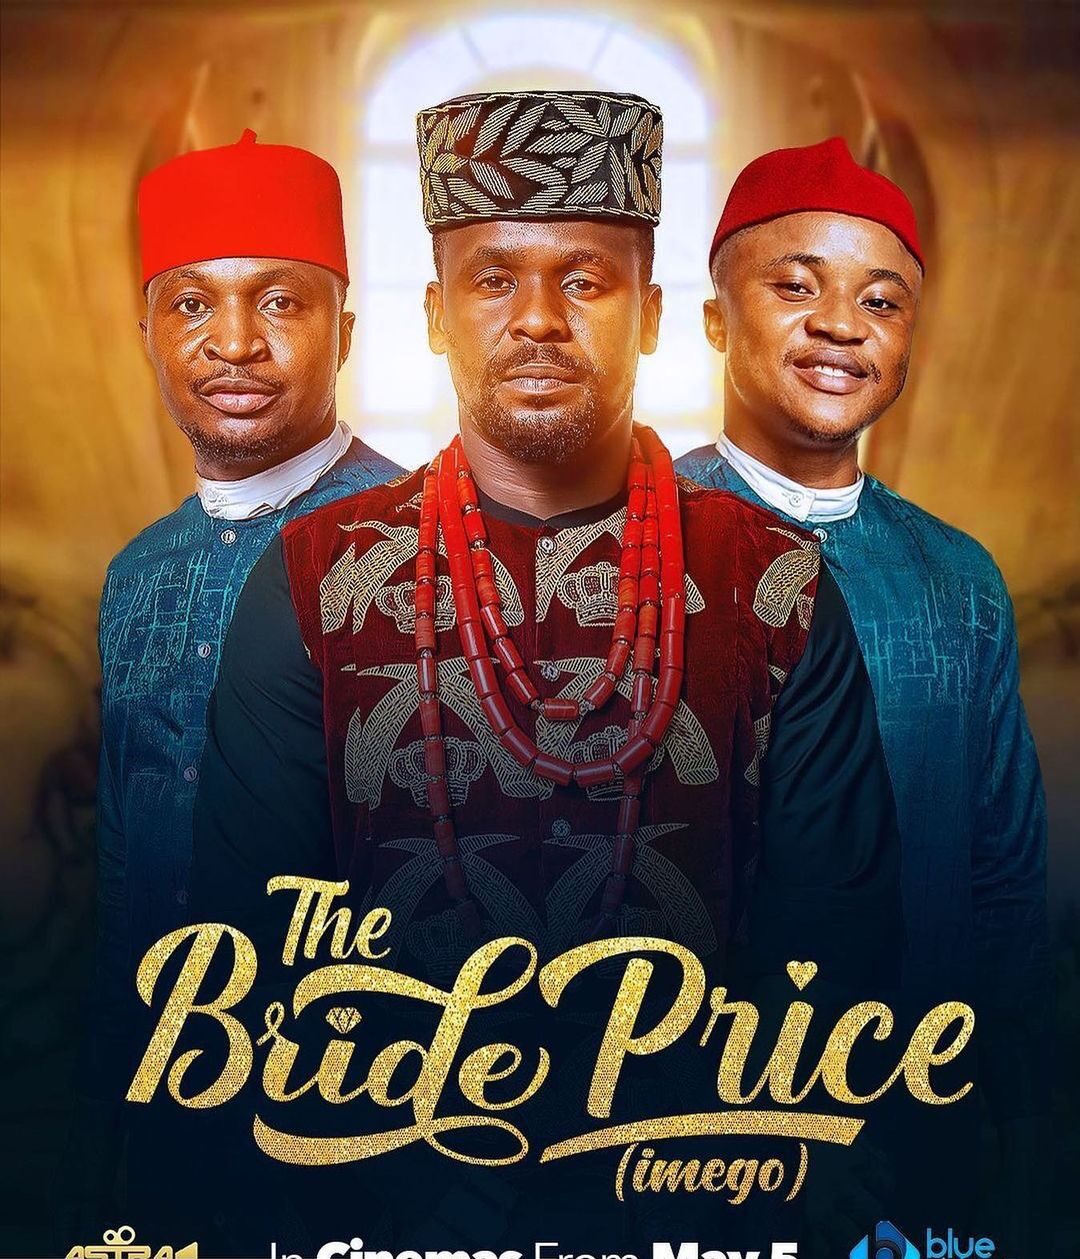 341512824 240366215153003 1561099311167001762 n e1684262342256 - Zubby Michael Powers “The Bride Price” To N13M In Ten Days